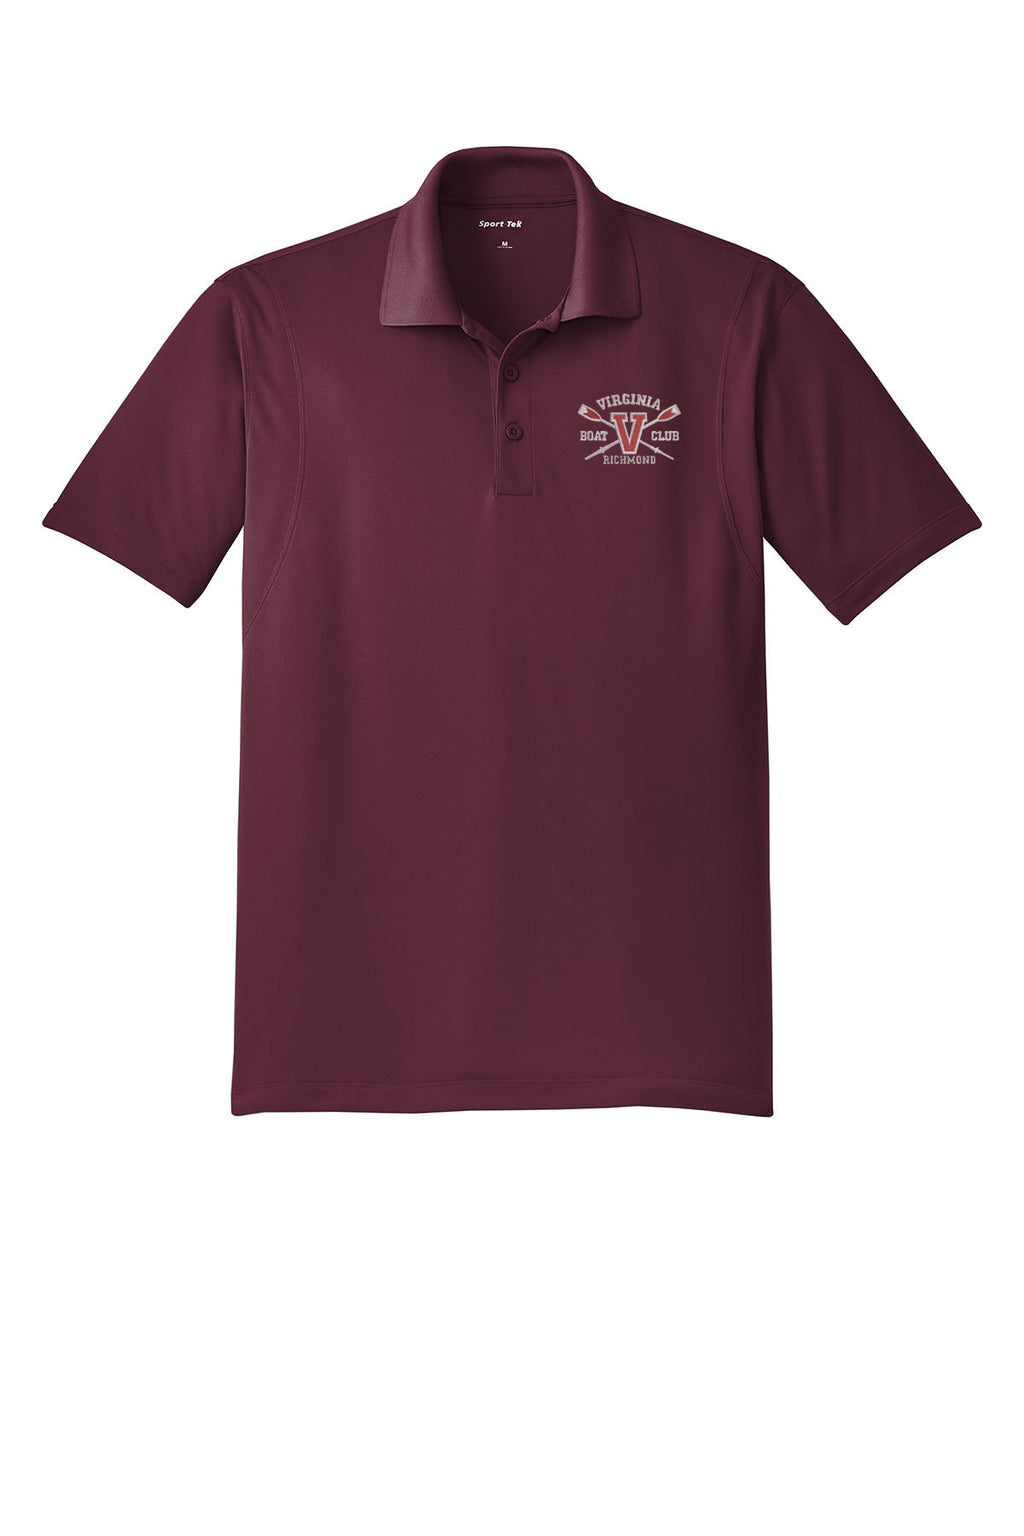 Virginia Boat Club Embroidered Performance Men's Polo